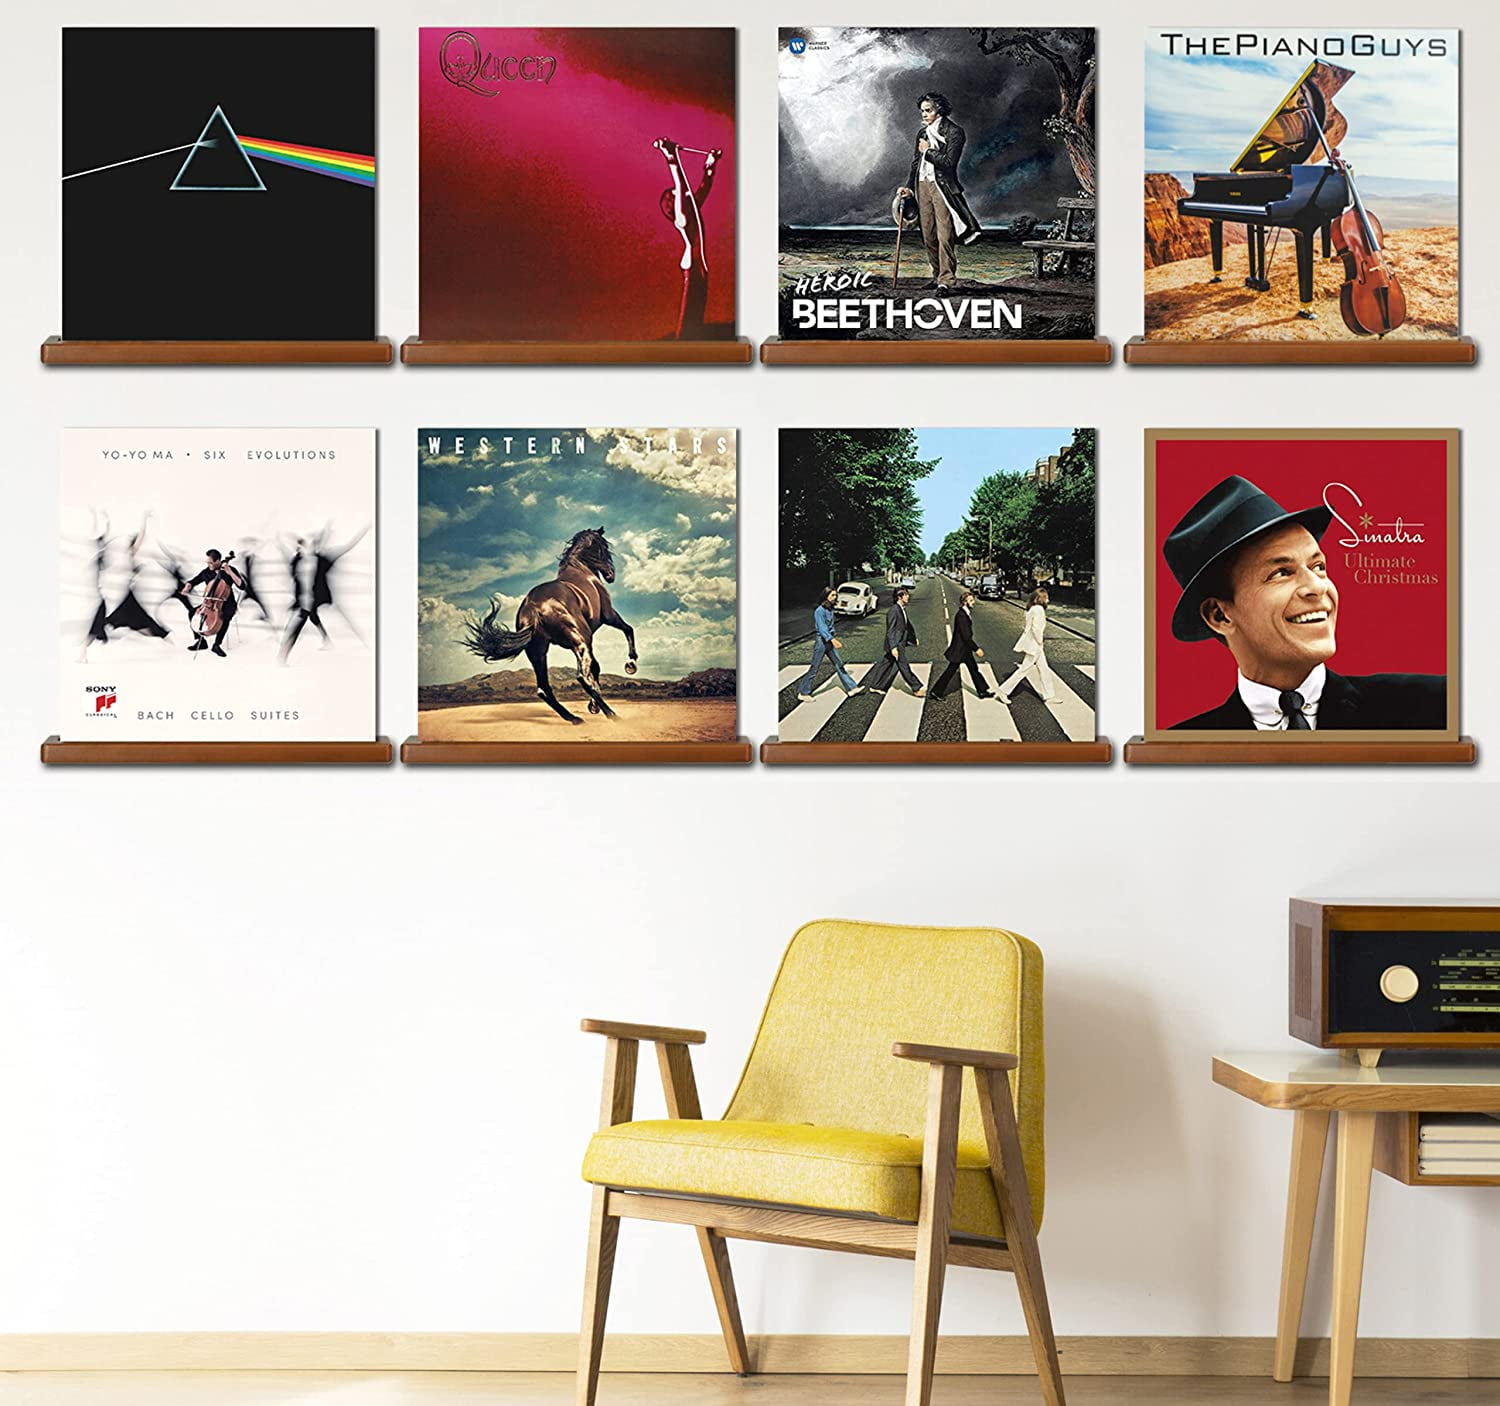 Now Playing Vinyl Record Wall Holder - Now Playing Vinyl Record Stand -  Vinyl Record Wall Mount Display Vinyl Wall Mount Record Shelf Hanging Wall